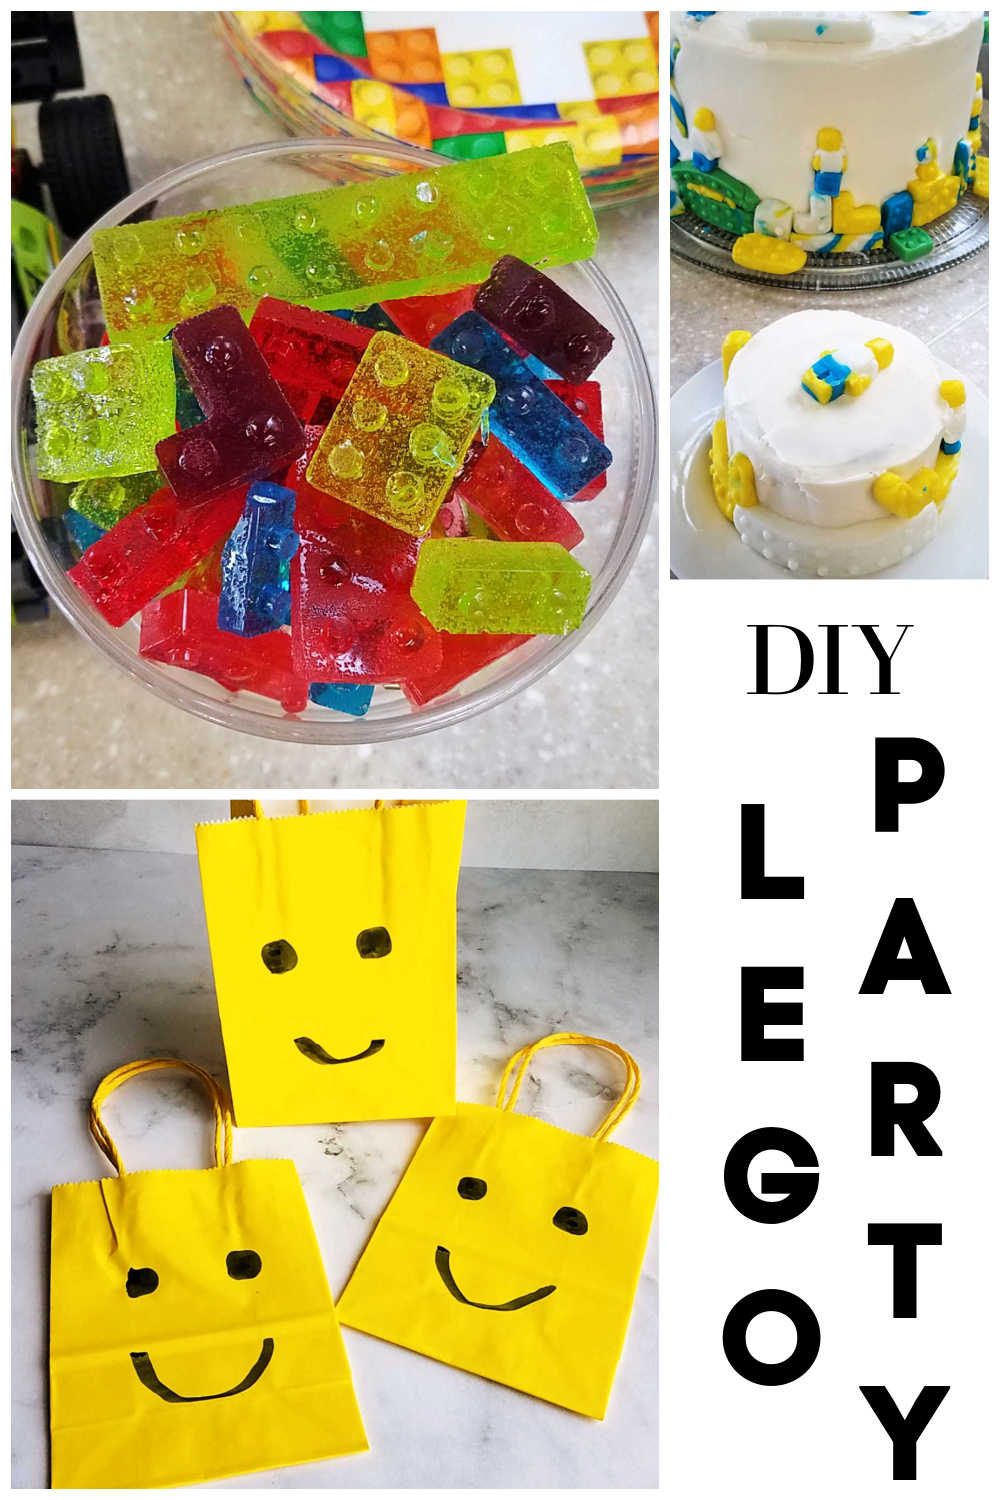 Having a Lego themed birthday is super fun! Check out how we put together this diy lego birthday extravaganza.